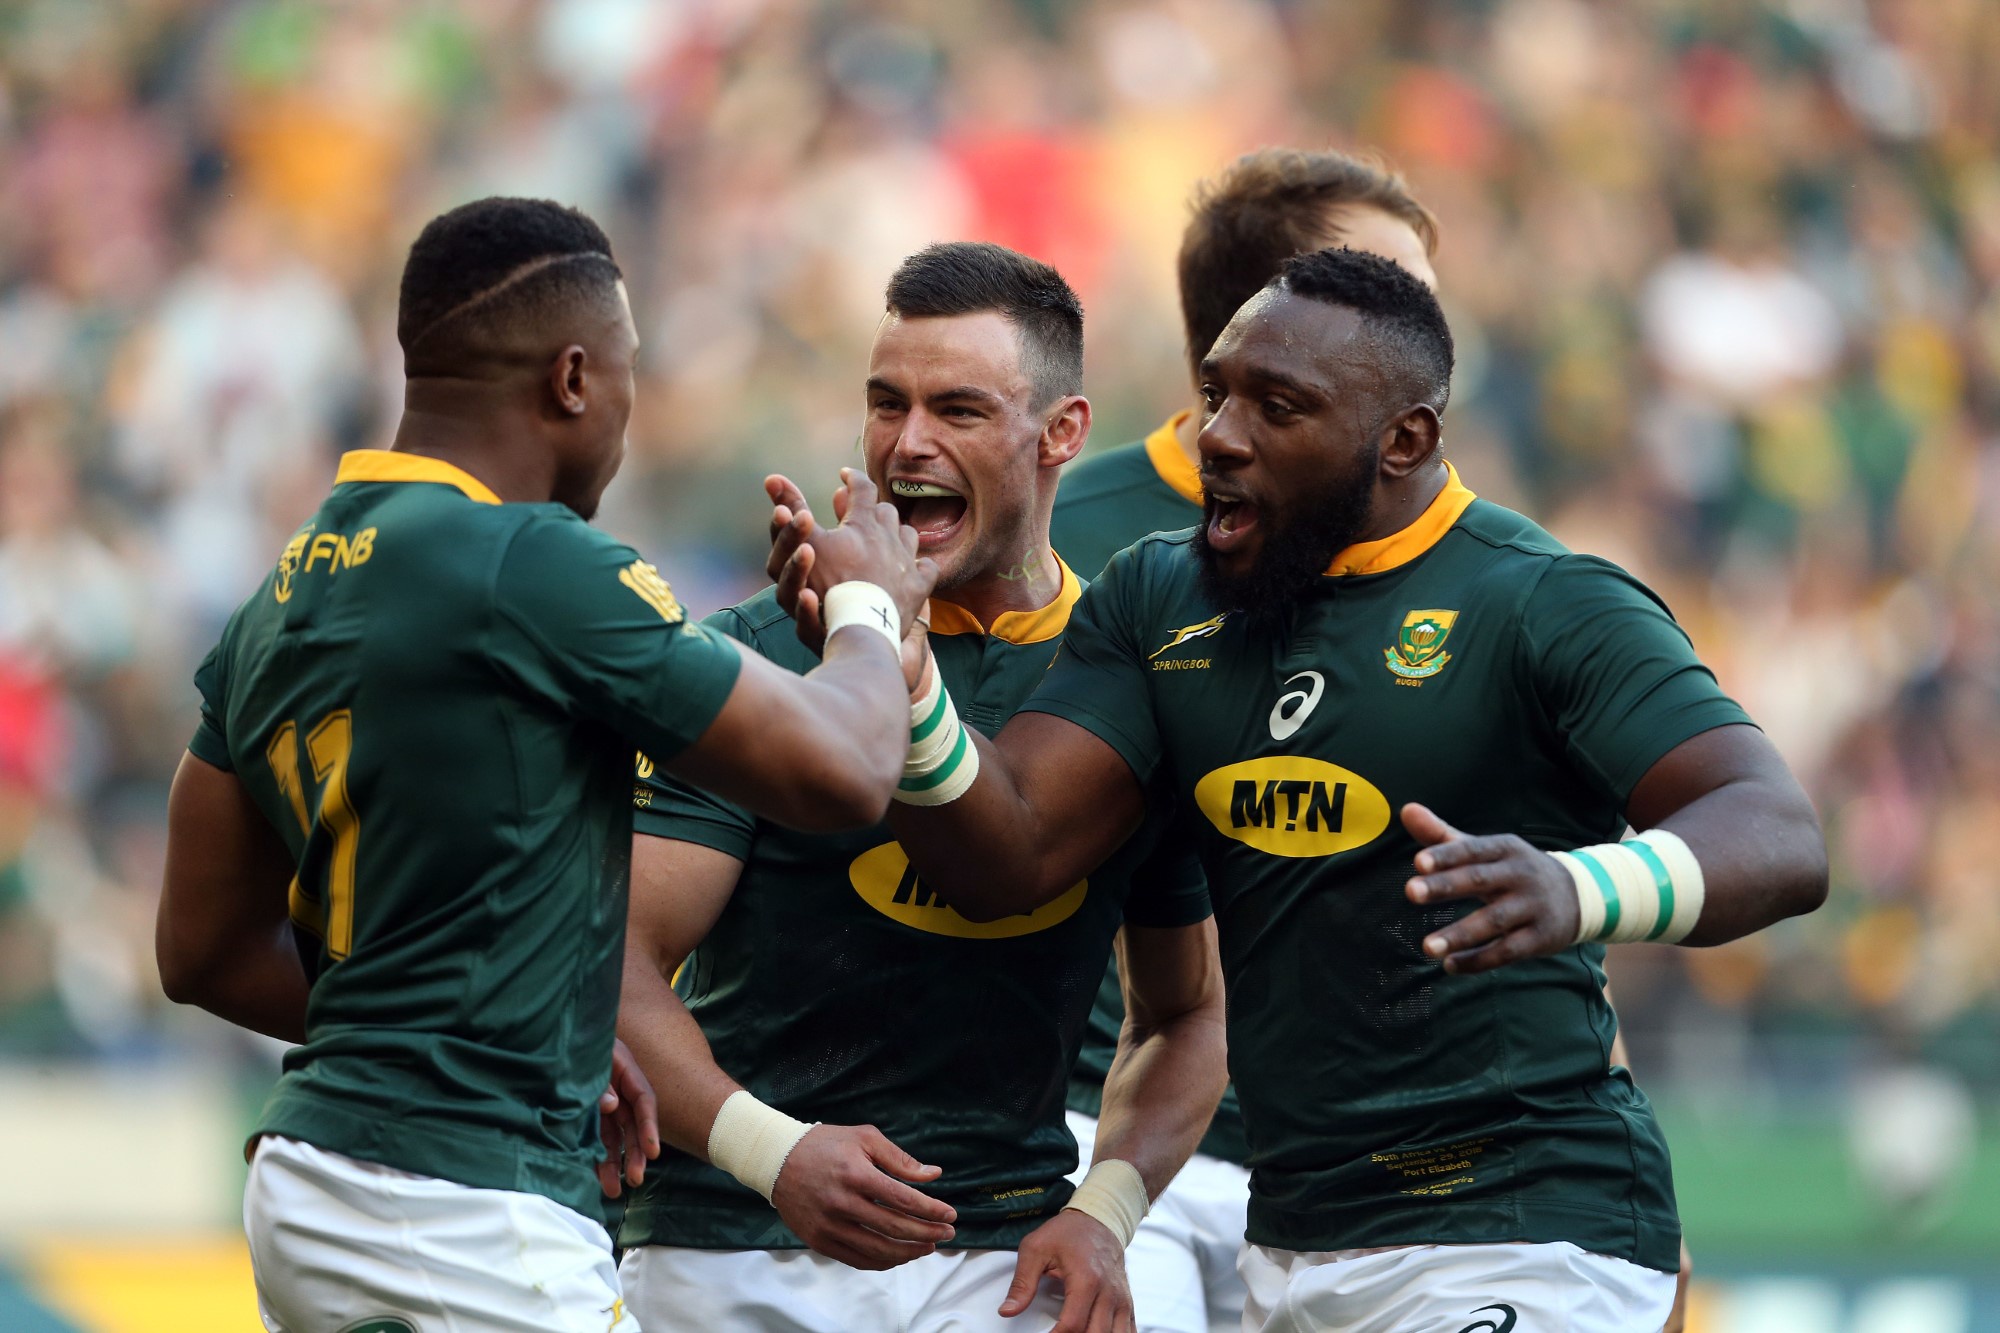 The Sideline: The stadiums are ready, but is South Africa